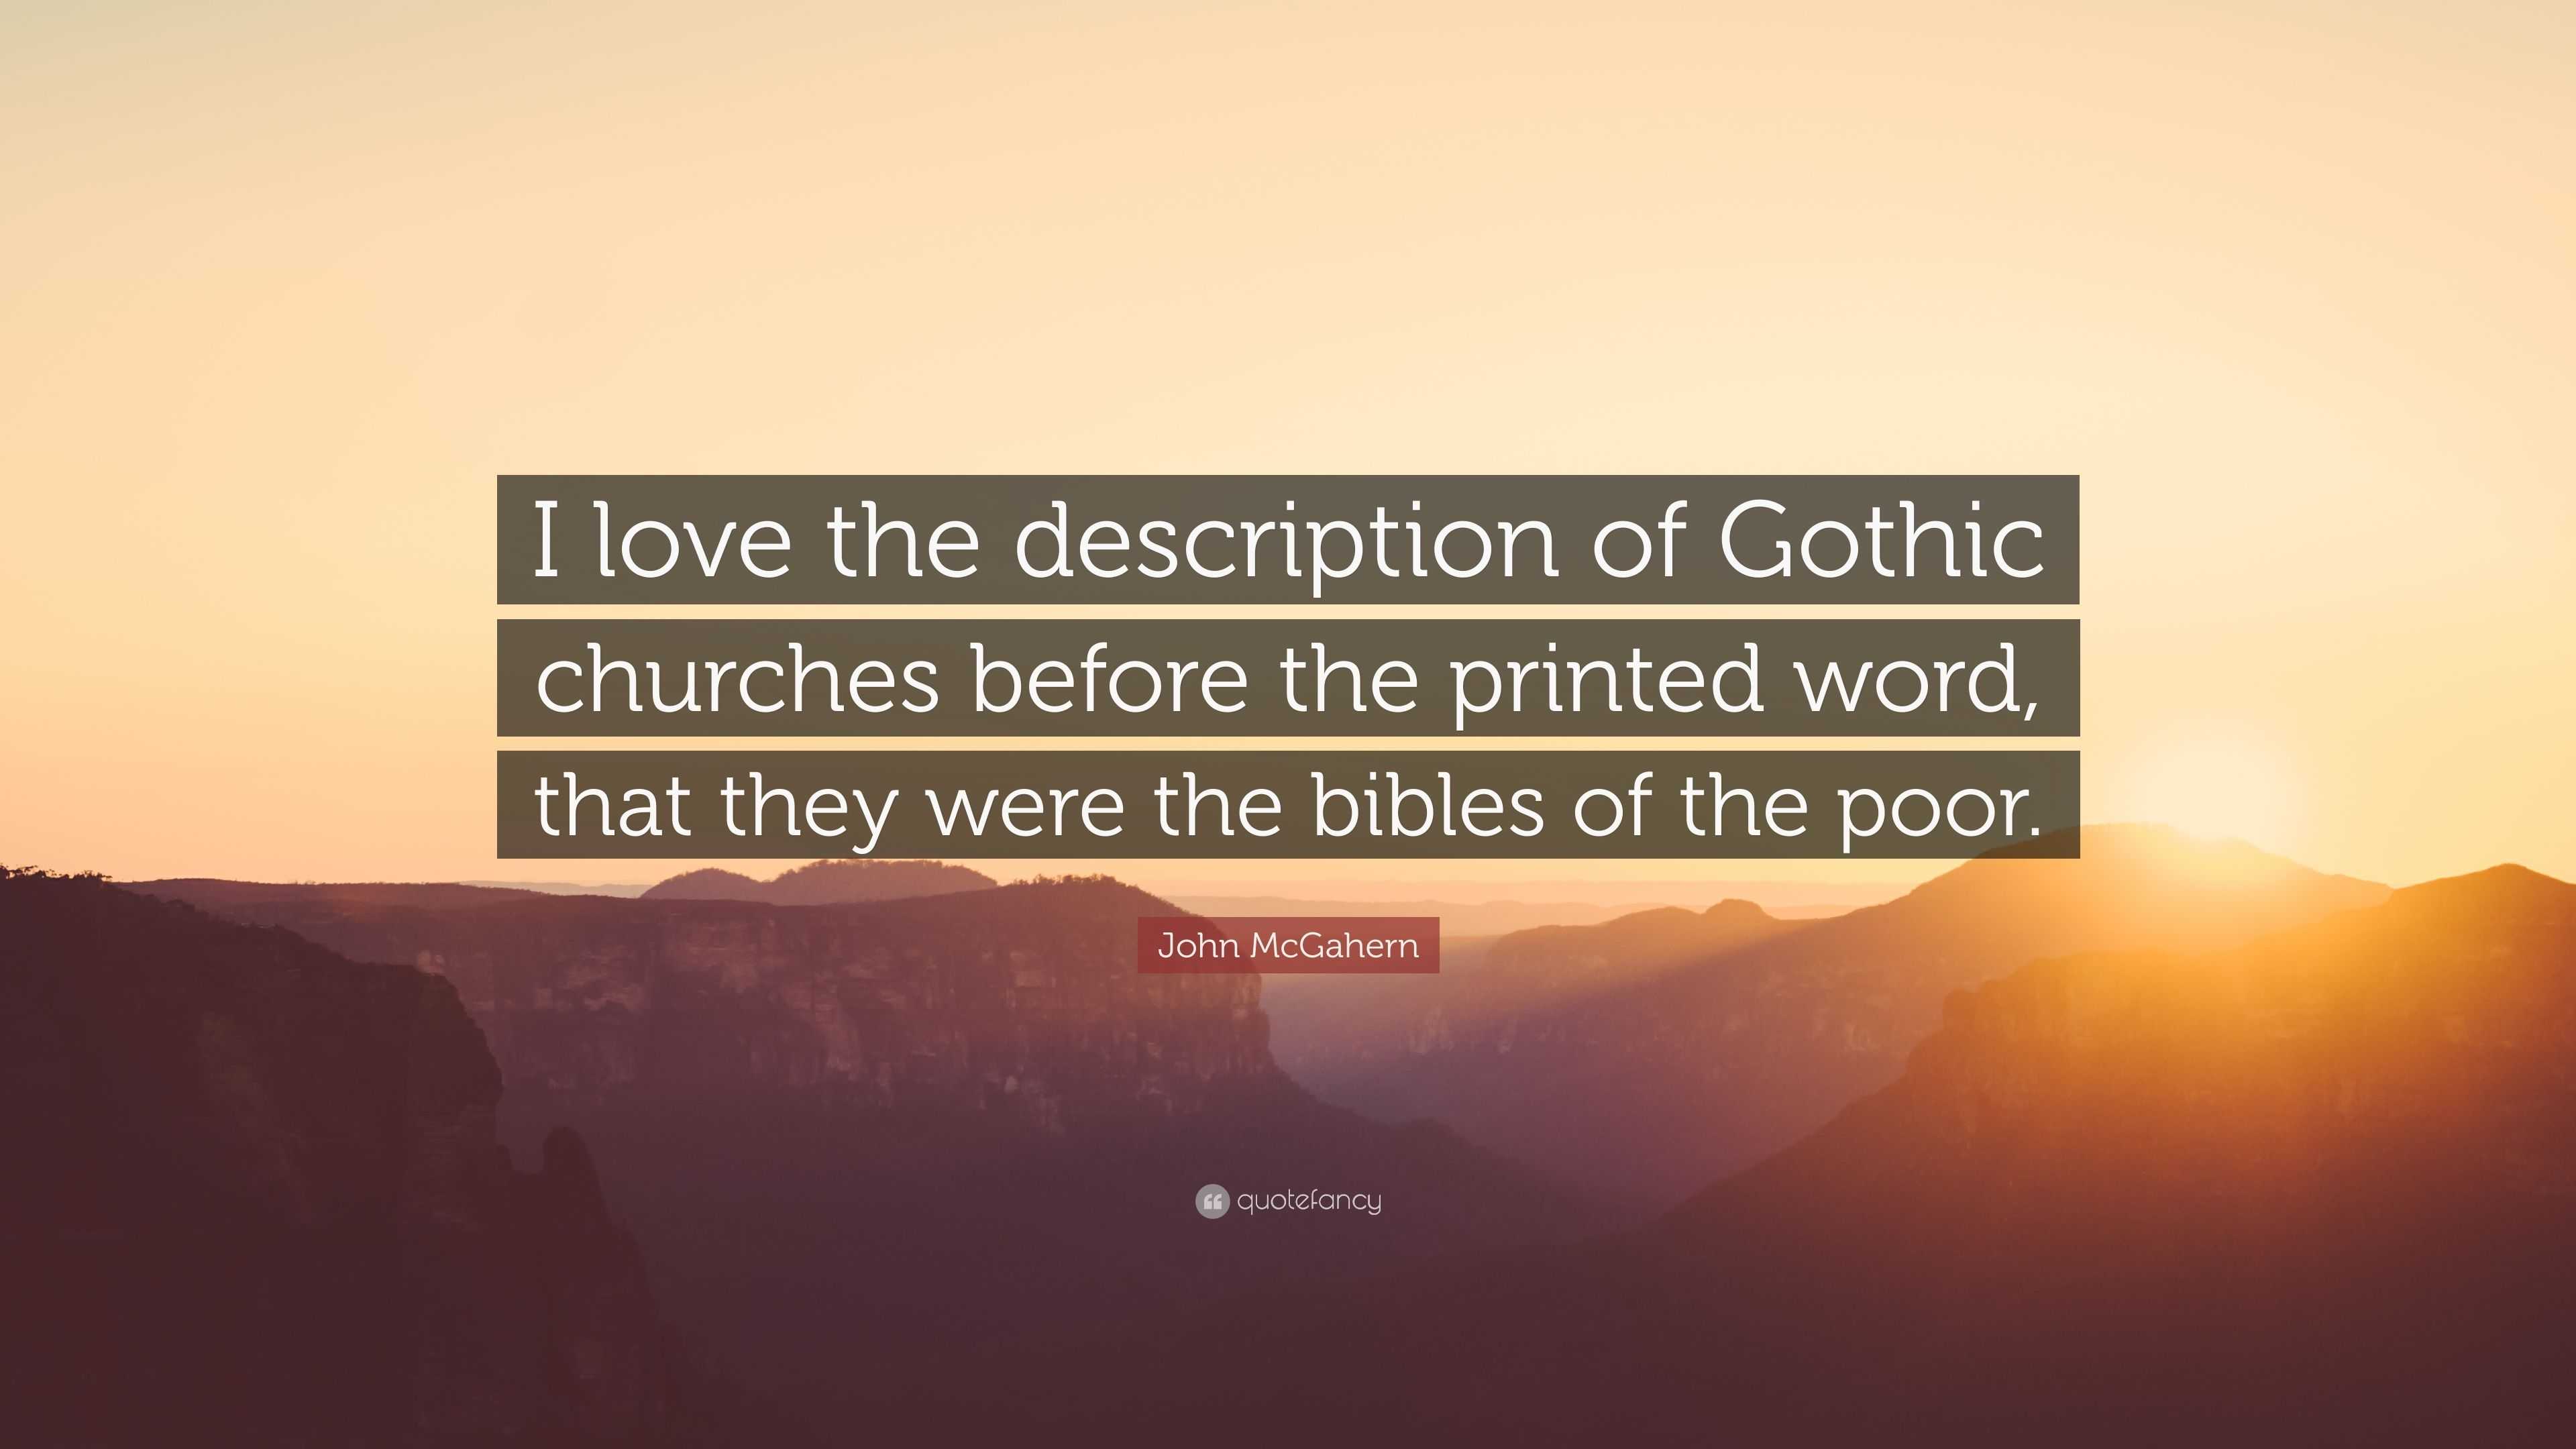 John Mcgahern Quote “i Love The Description Of Gothic Churches Before The Printed Word That